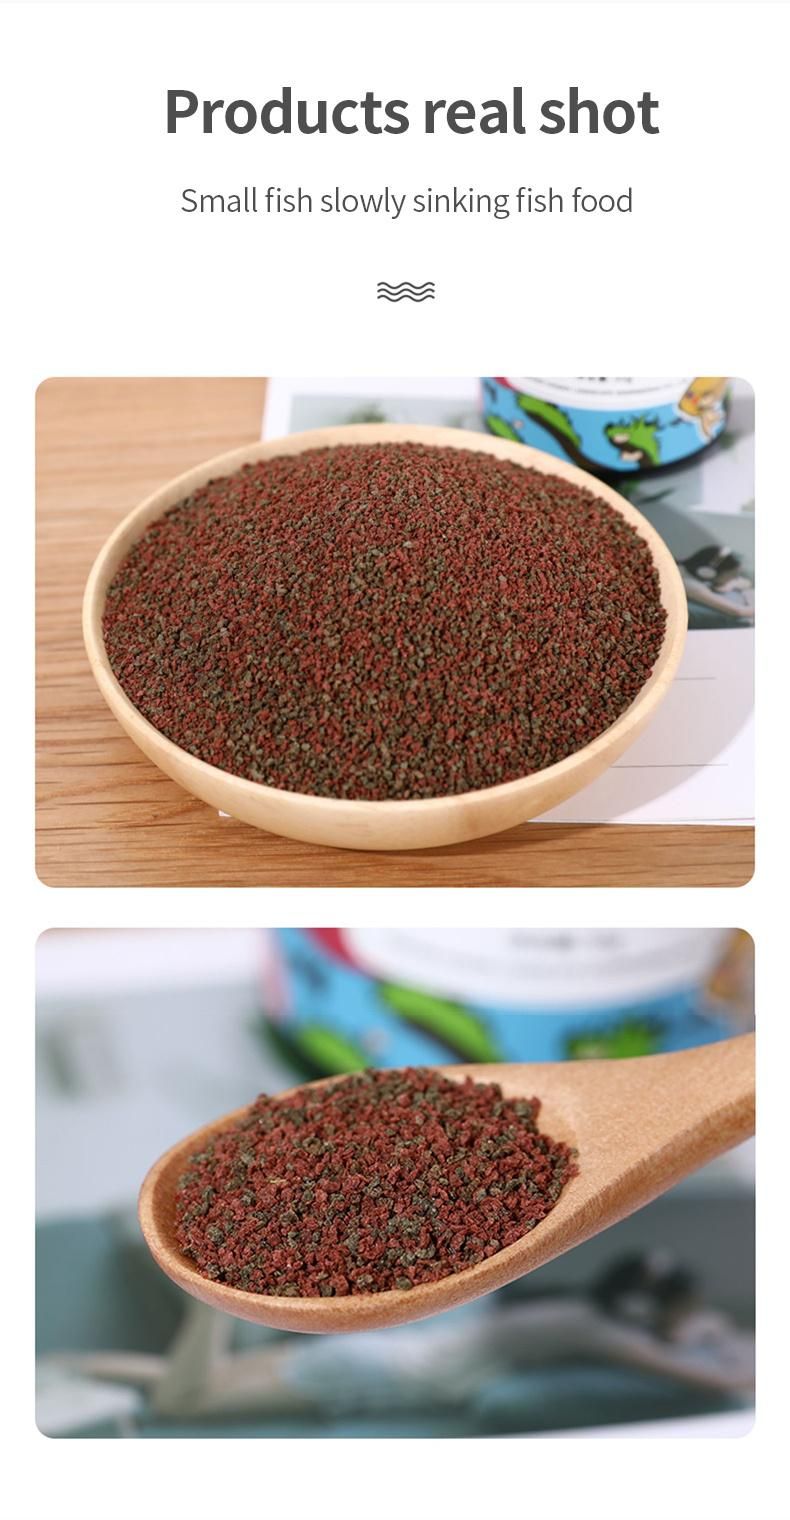 Yee Feed for Tropical Fish Enhance The Colour of The Fish Body Healthy Fish Feed